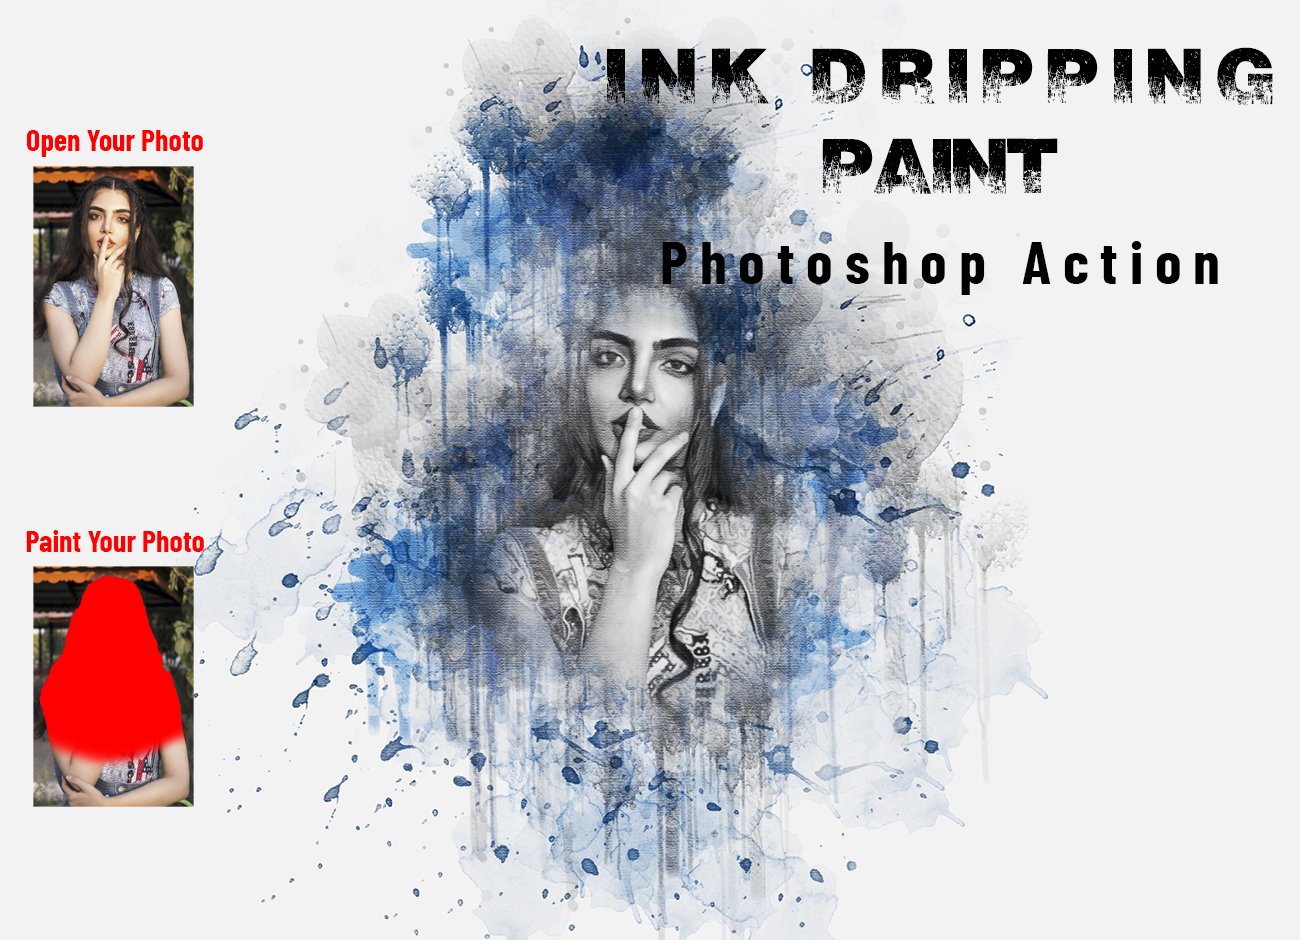 Ink Dripping Paint Photoshop Actioncover image.